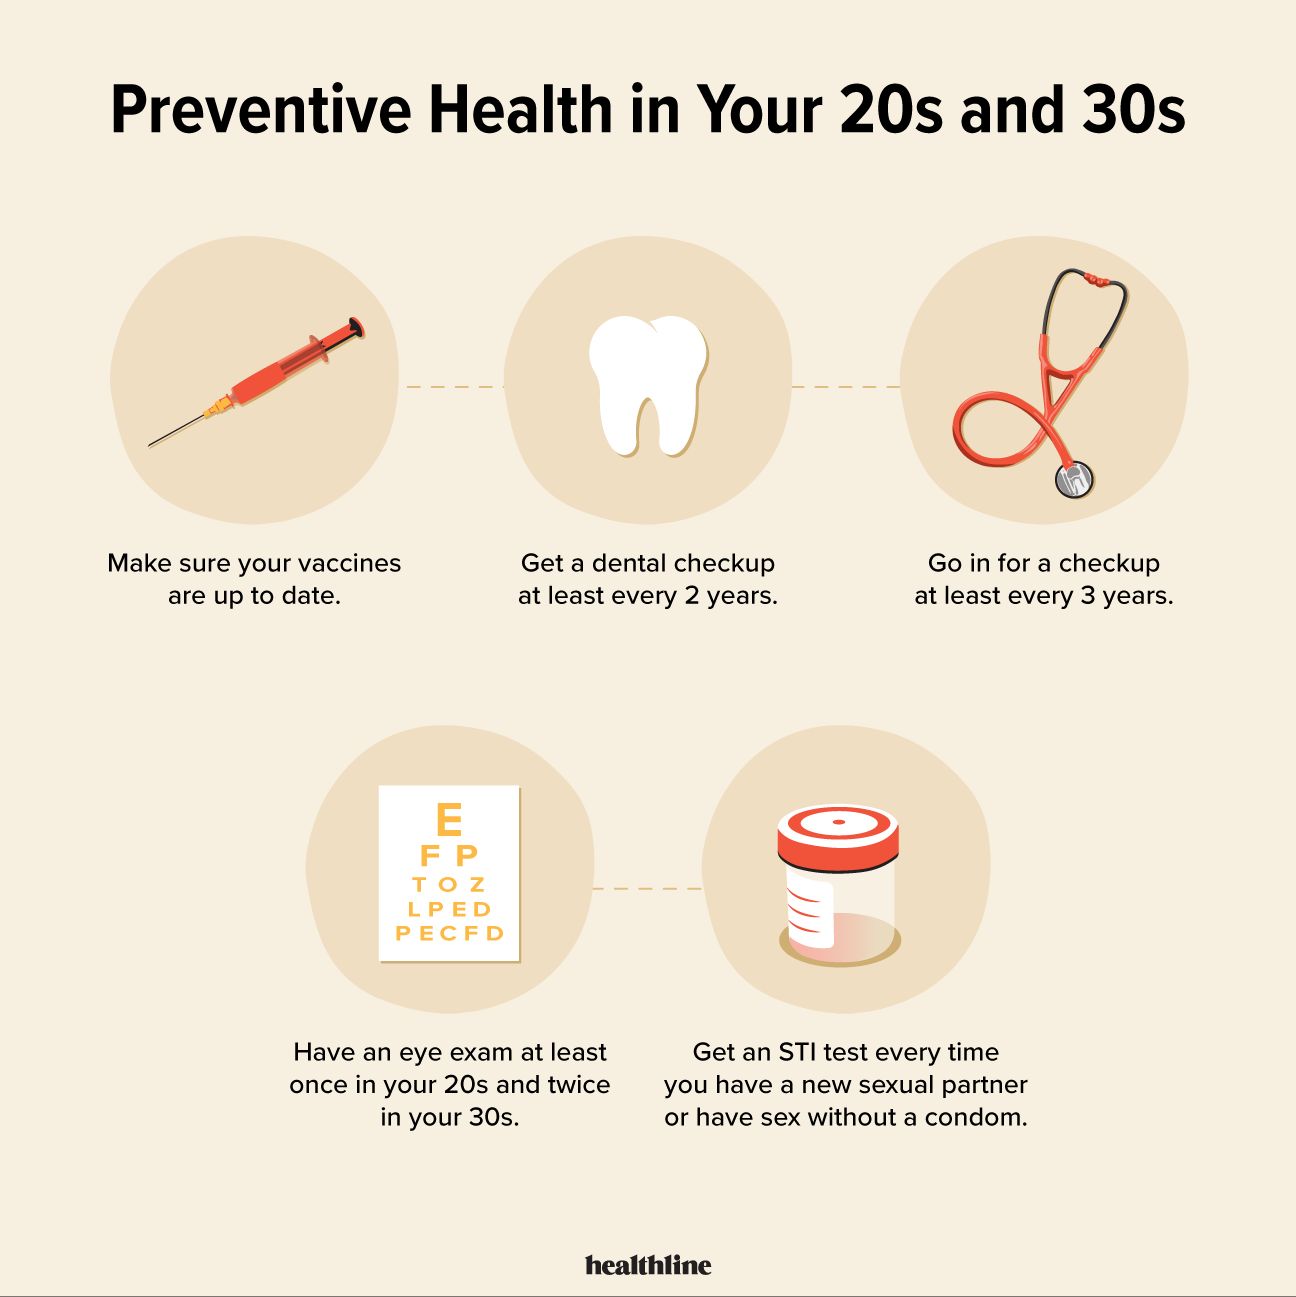 Preventive health screenings in your 20s and 30s